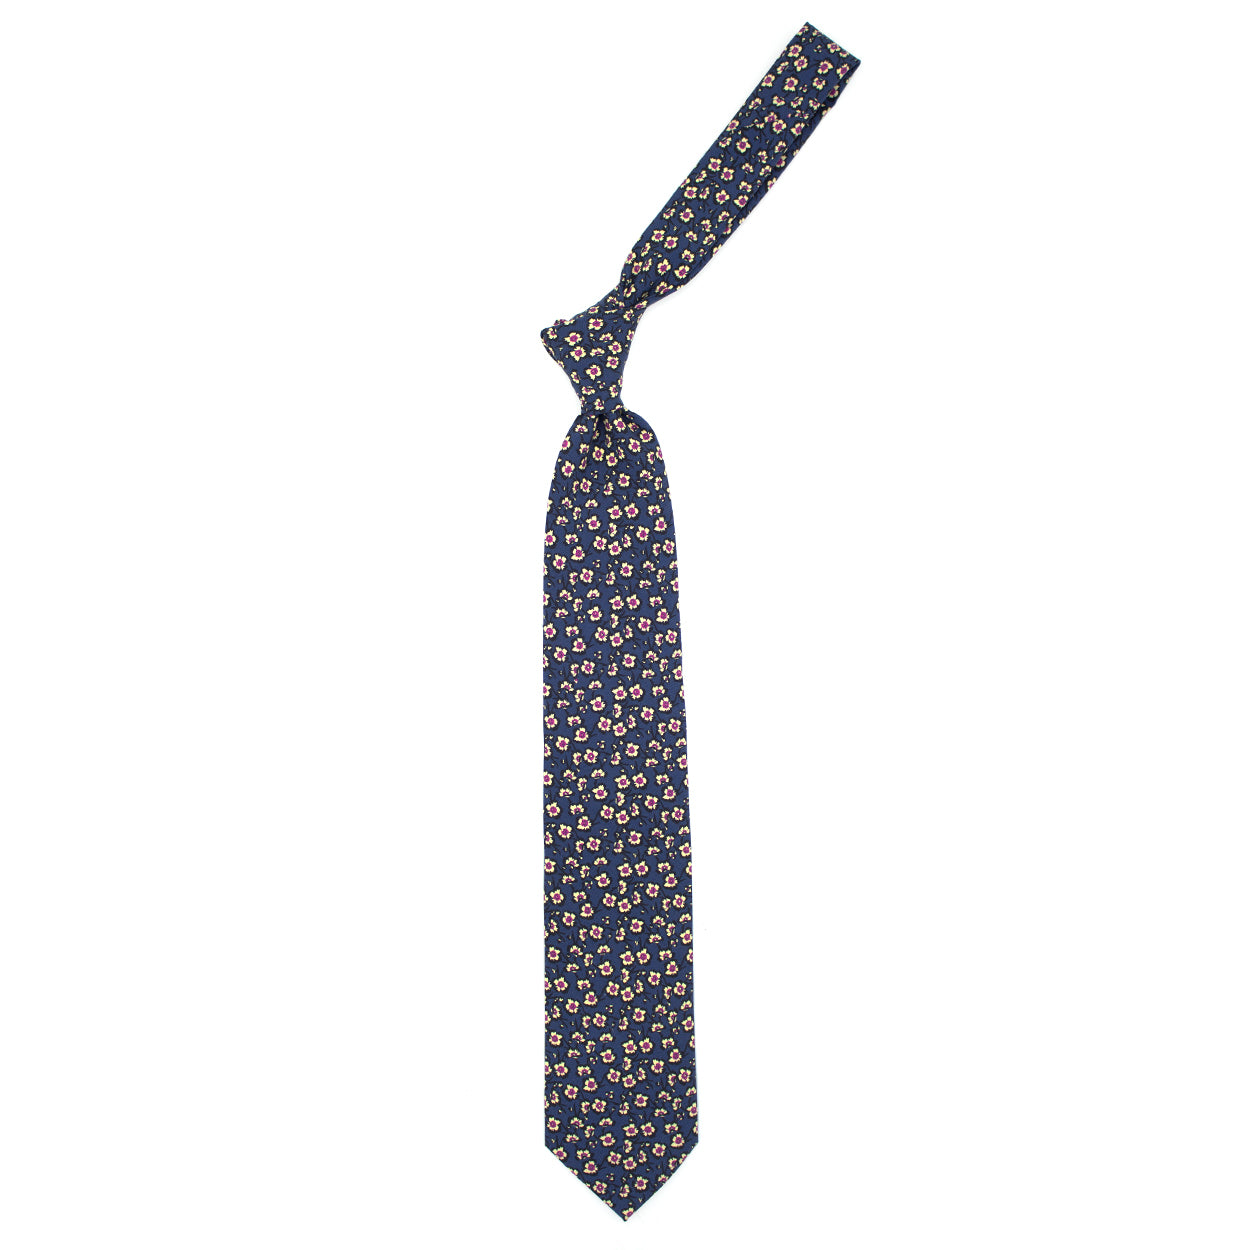 Blue tie with flowers